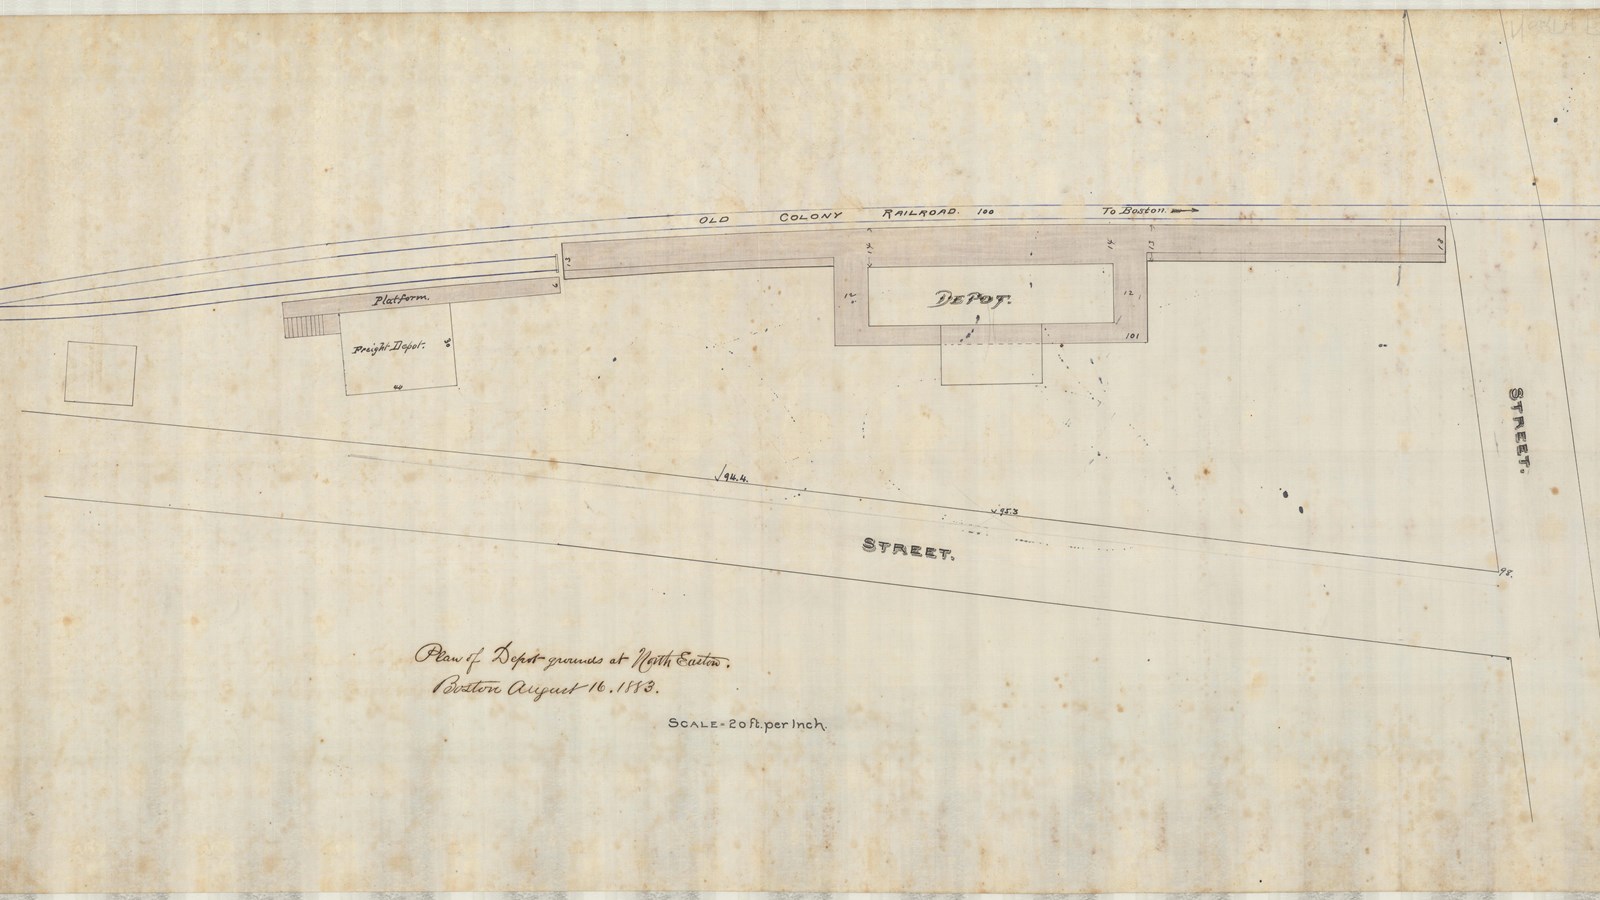 Pencil plan of two roads intersecting with buildings at intersection along a railroad